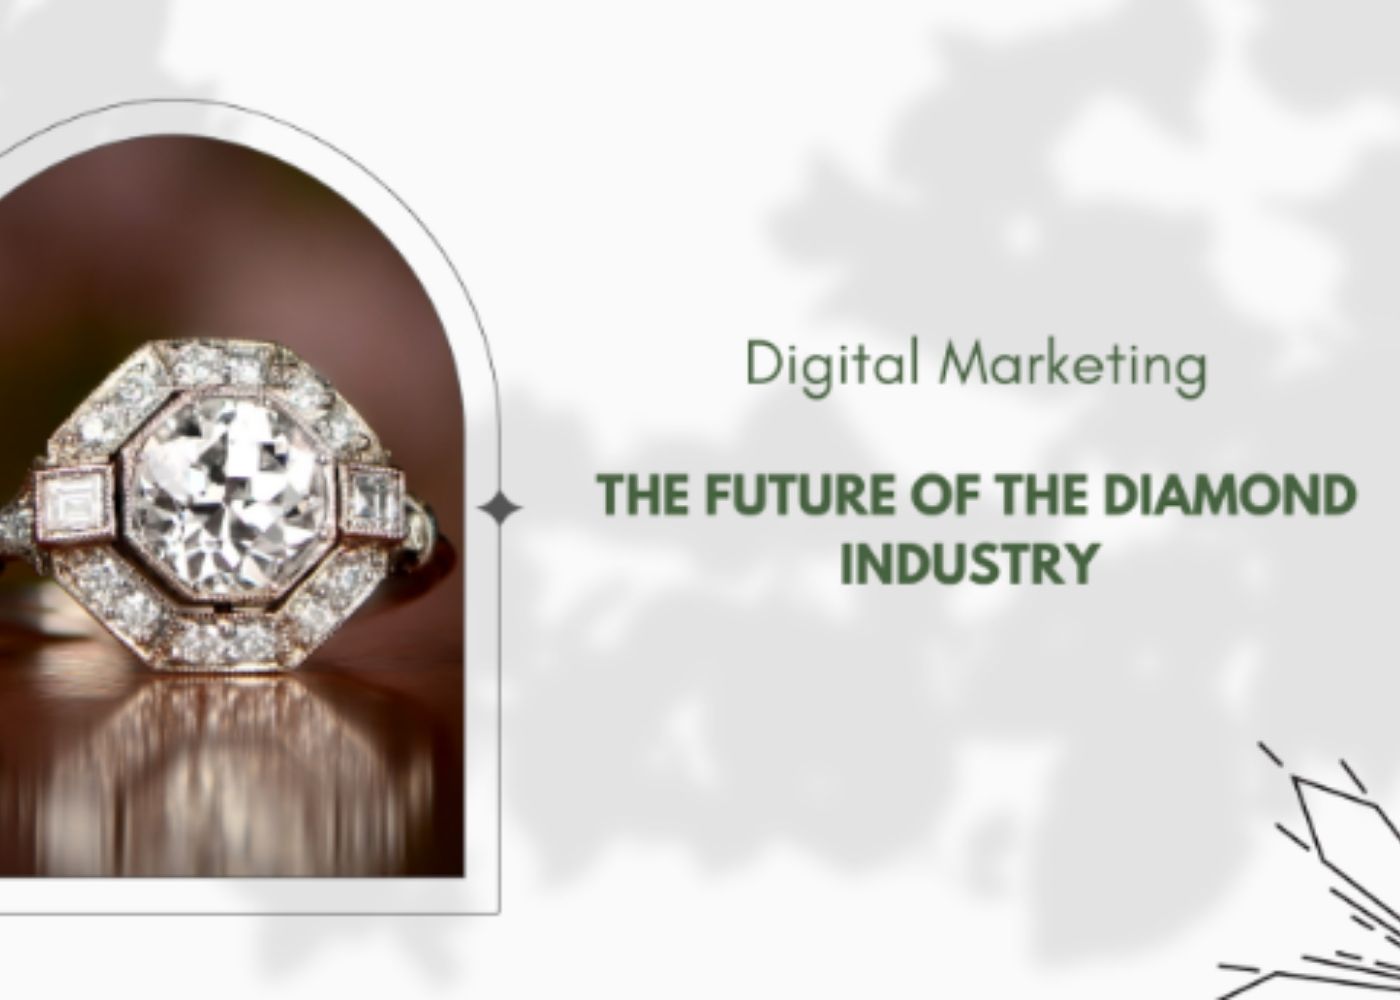 How Digital Marketing Can Change the Diamond Industry in the Future?